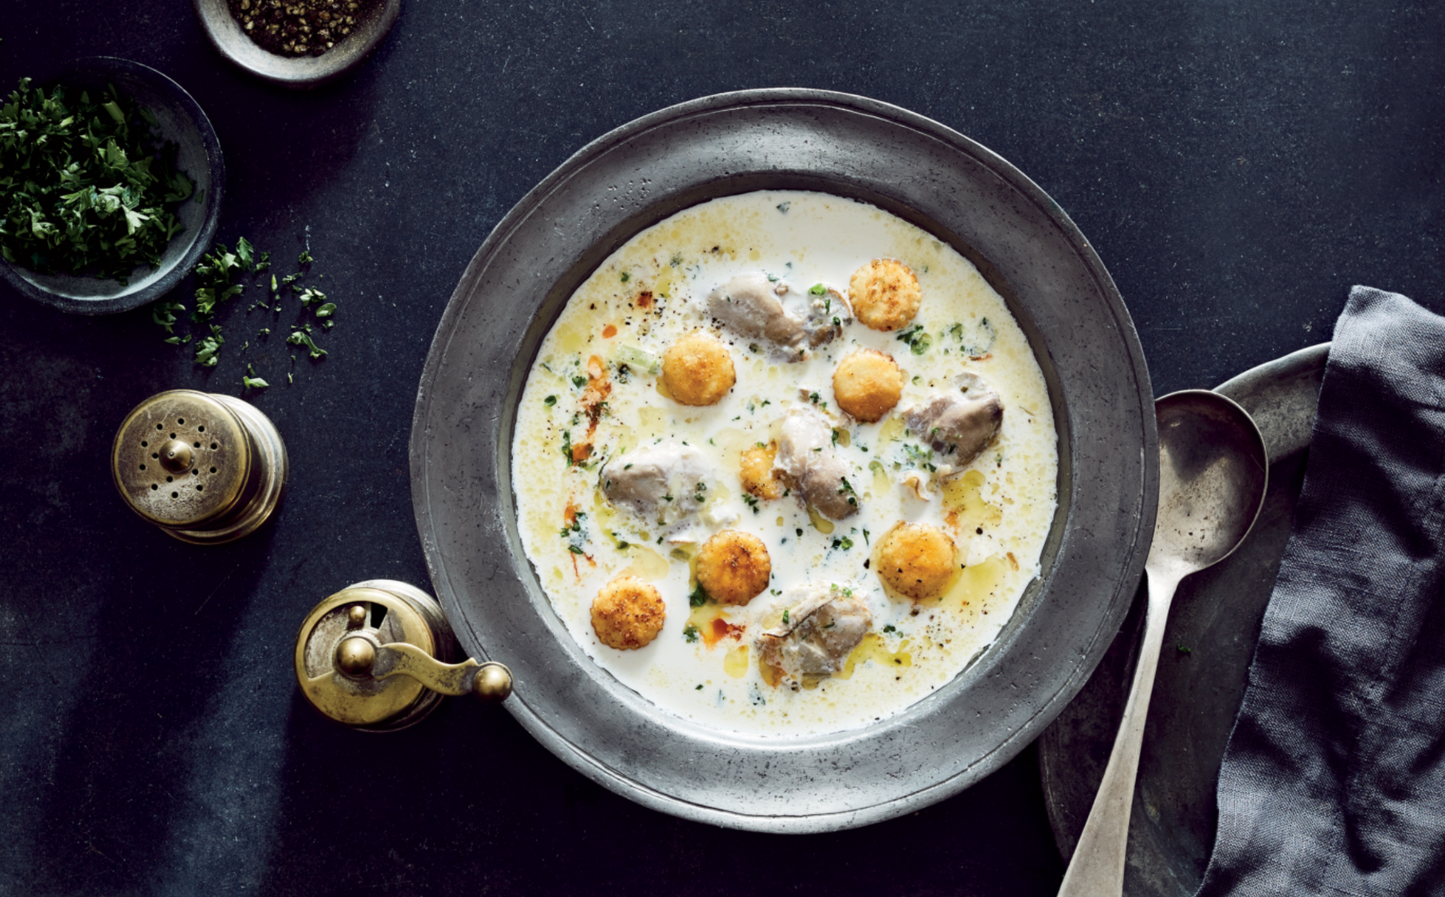 Oyster Holidays - The Tradition of Oyster Stew